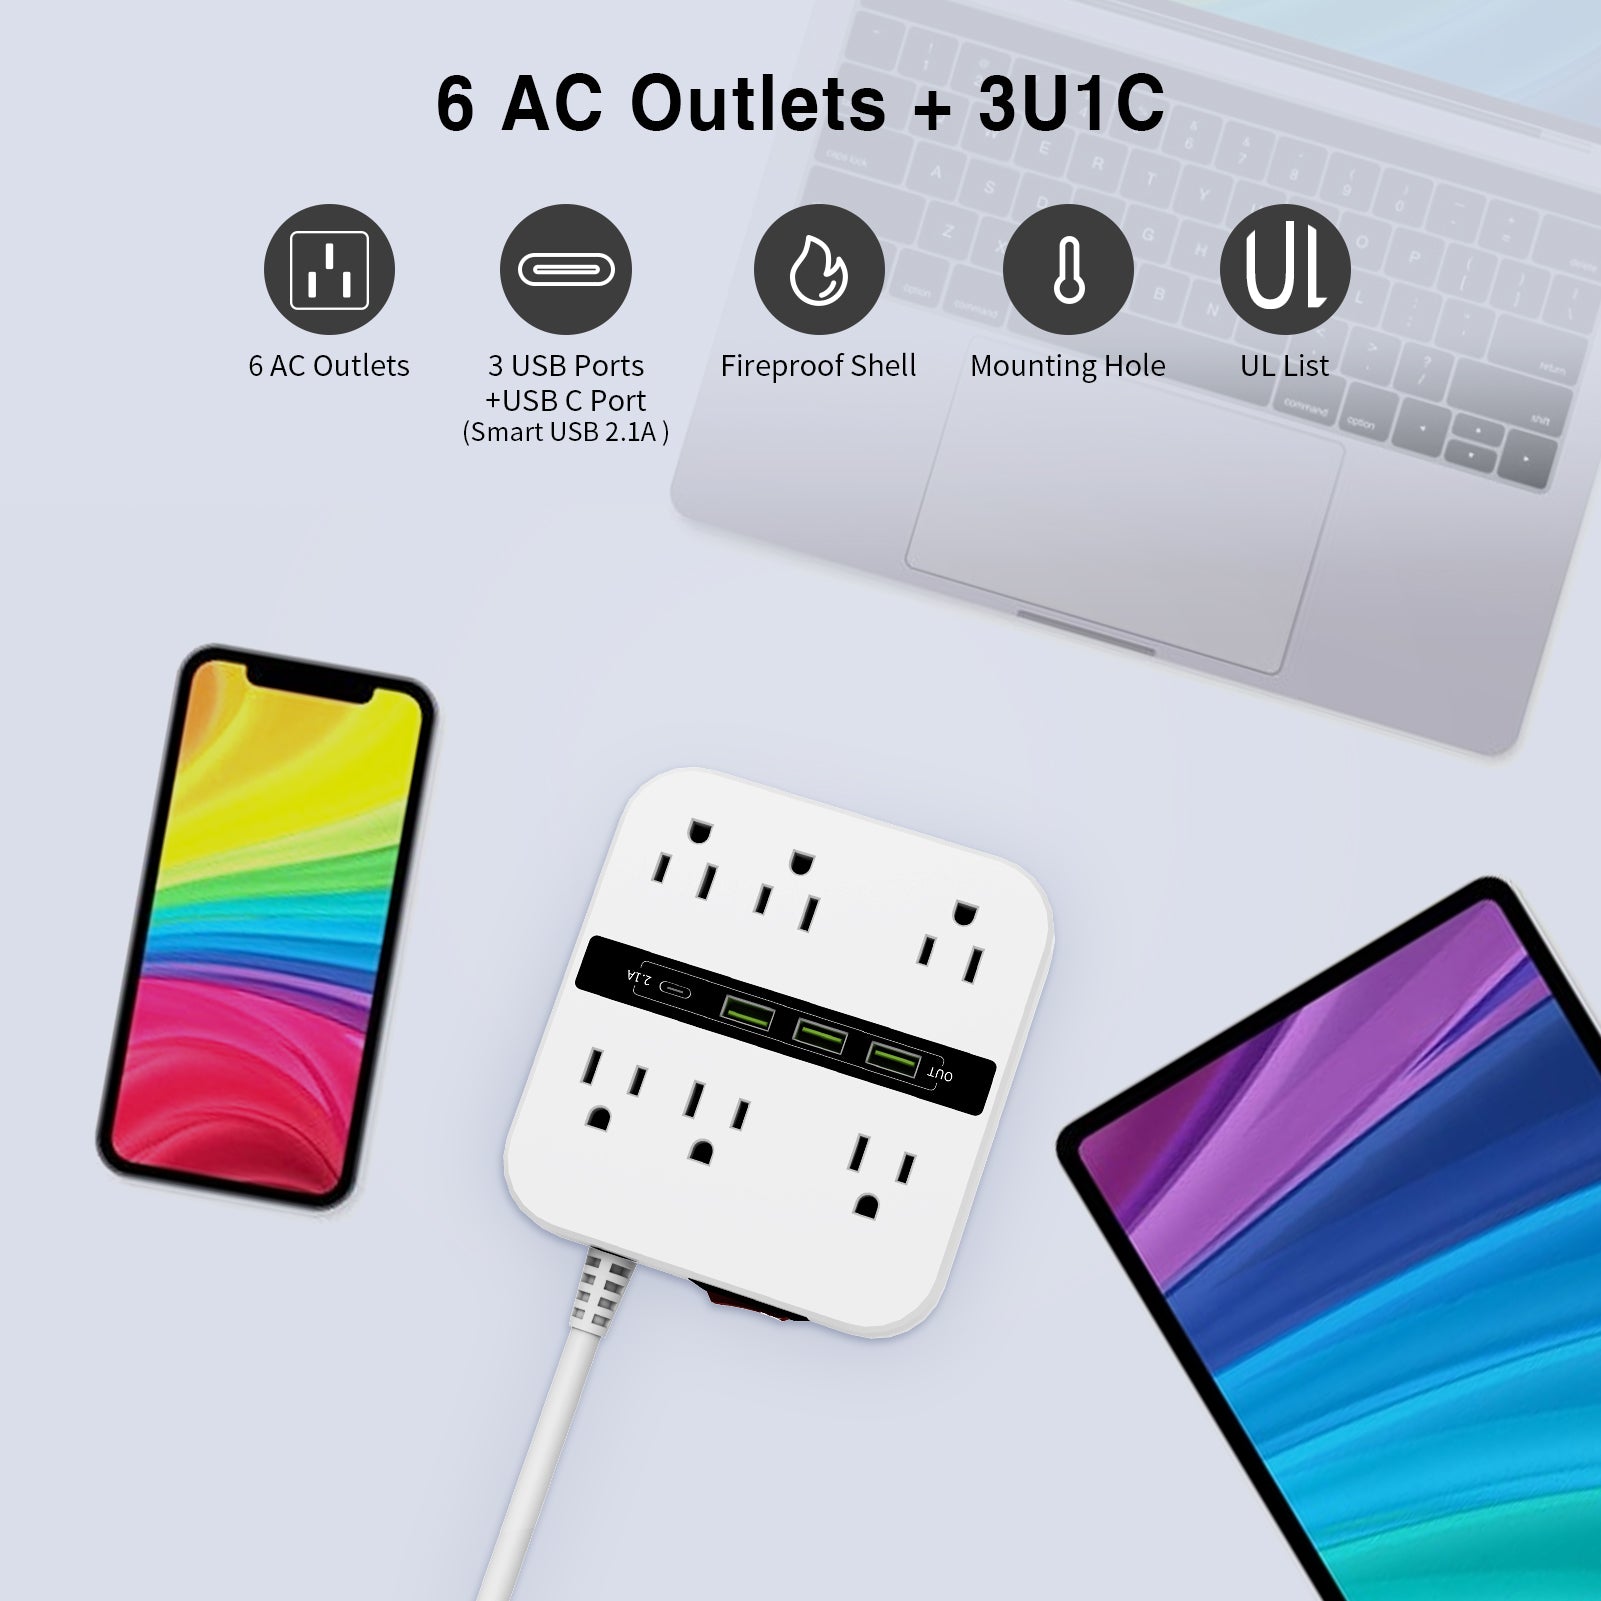 Surge Protector Power Strip - 6 Widely Outlets and 4 USB Ports(1 USB C), Ablegrid Outlet Extender with 6.6ft White Flat Extension Cord for Travel, Cruise Ship and Dorm Room Essentials UL Listed